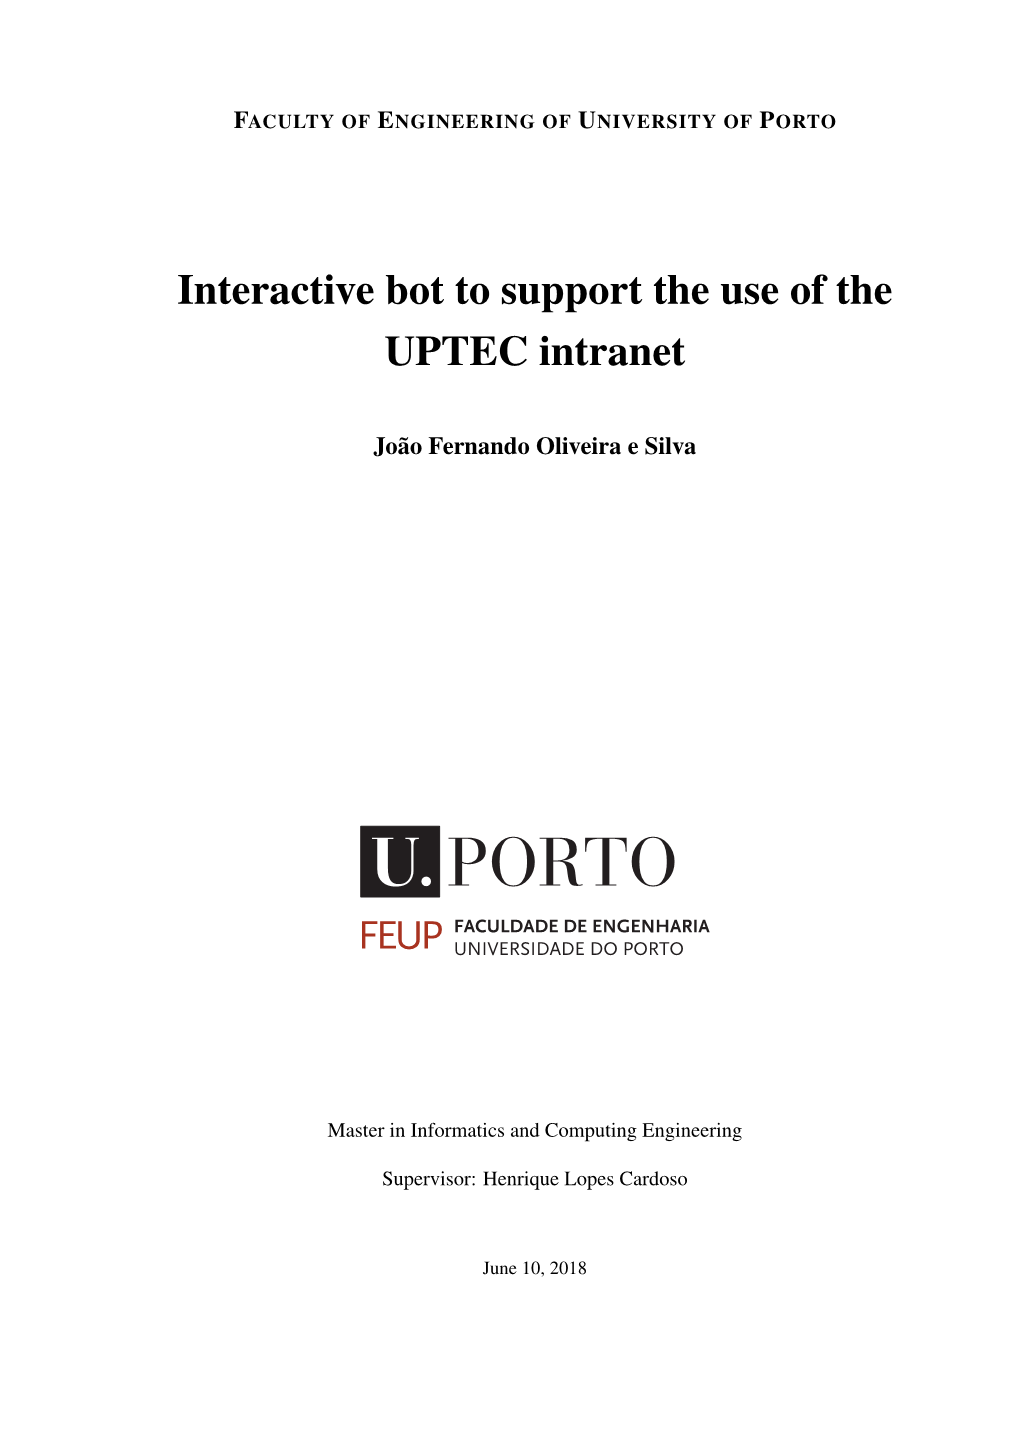 Interactive Bot to Support the Use of the UPTEC Intranet